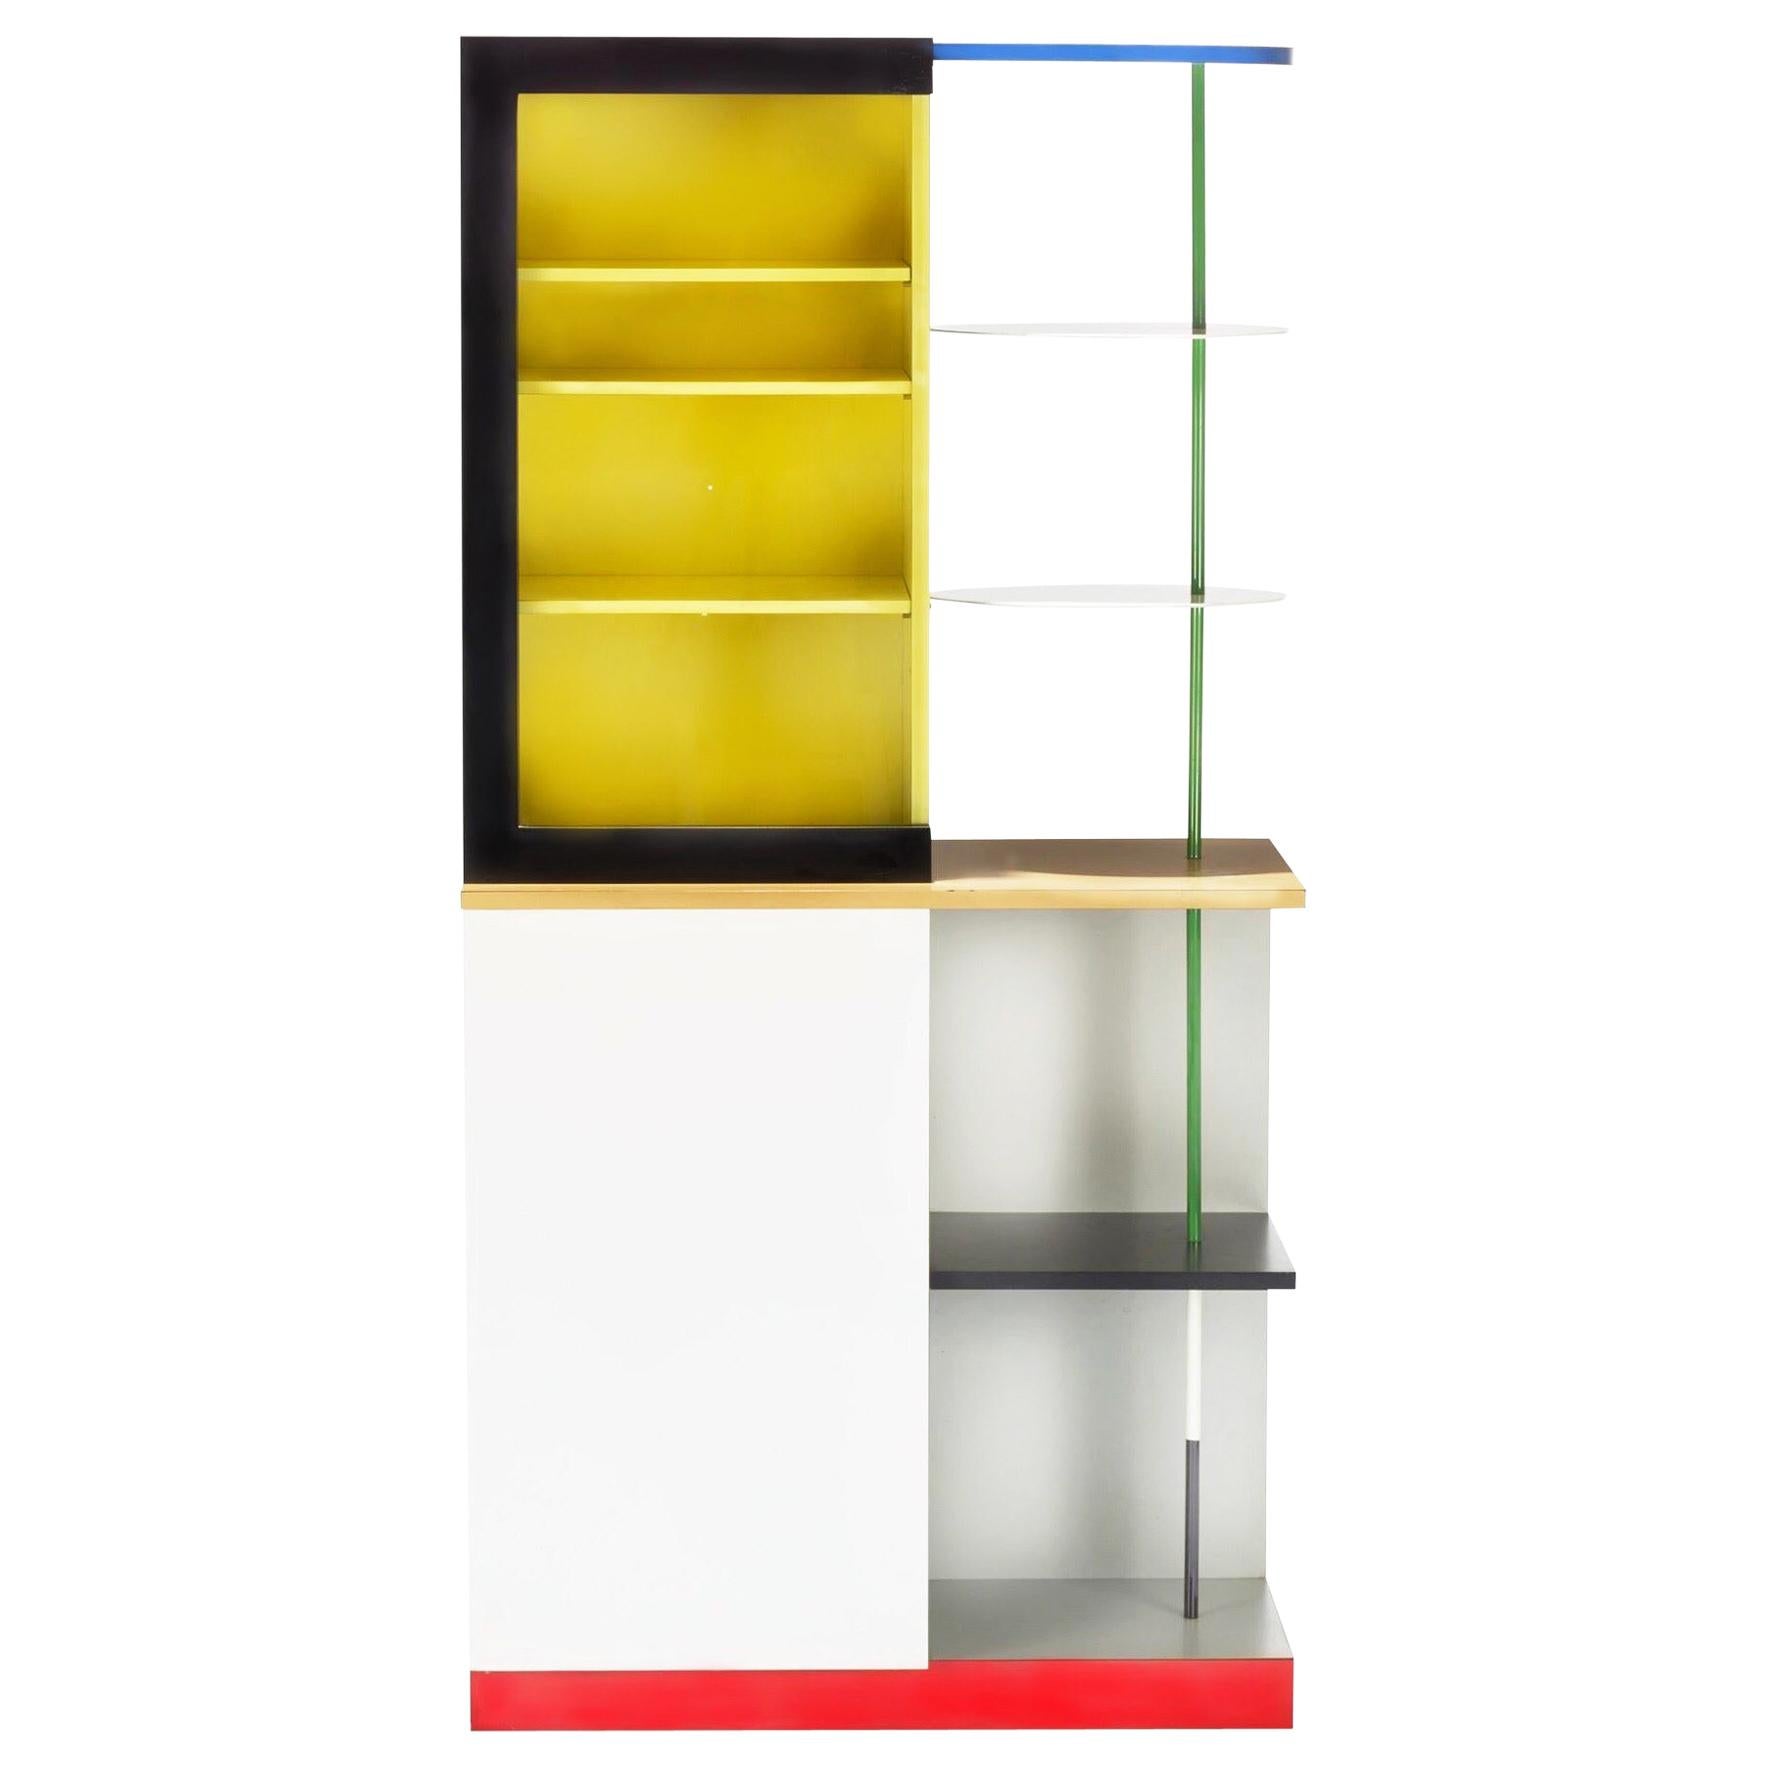 Memphis Milano Airport Cabinet by Gerard Taylor 1982, De Stijl, Red Yellow Blue